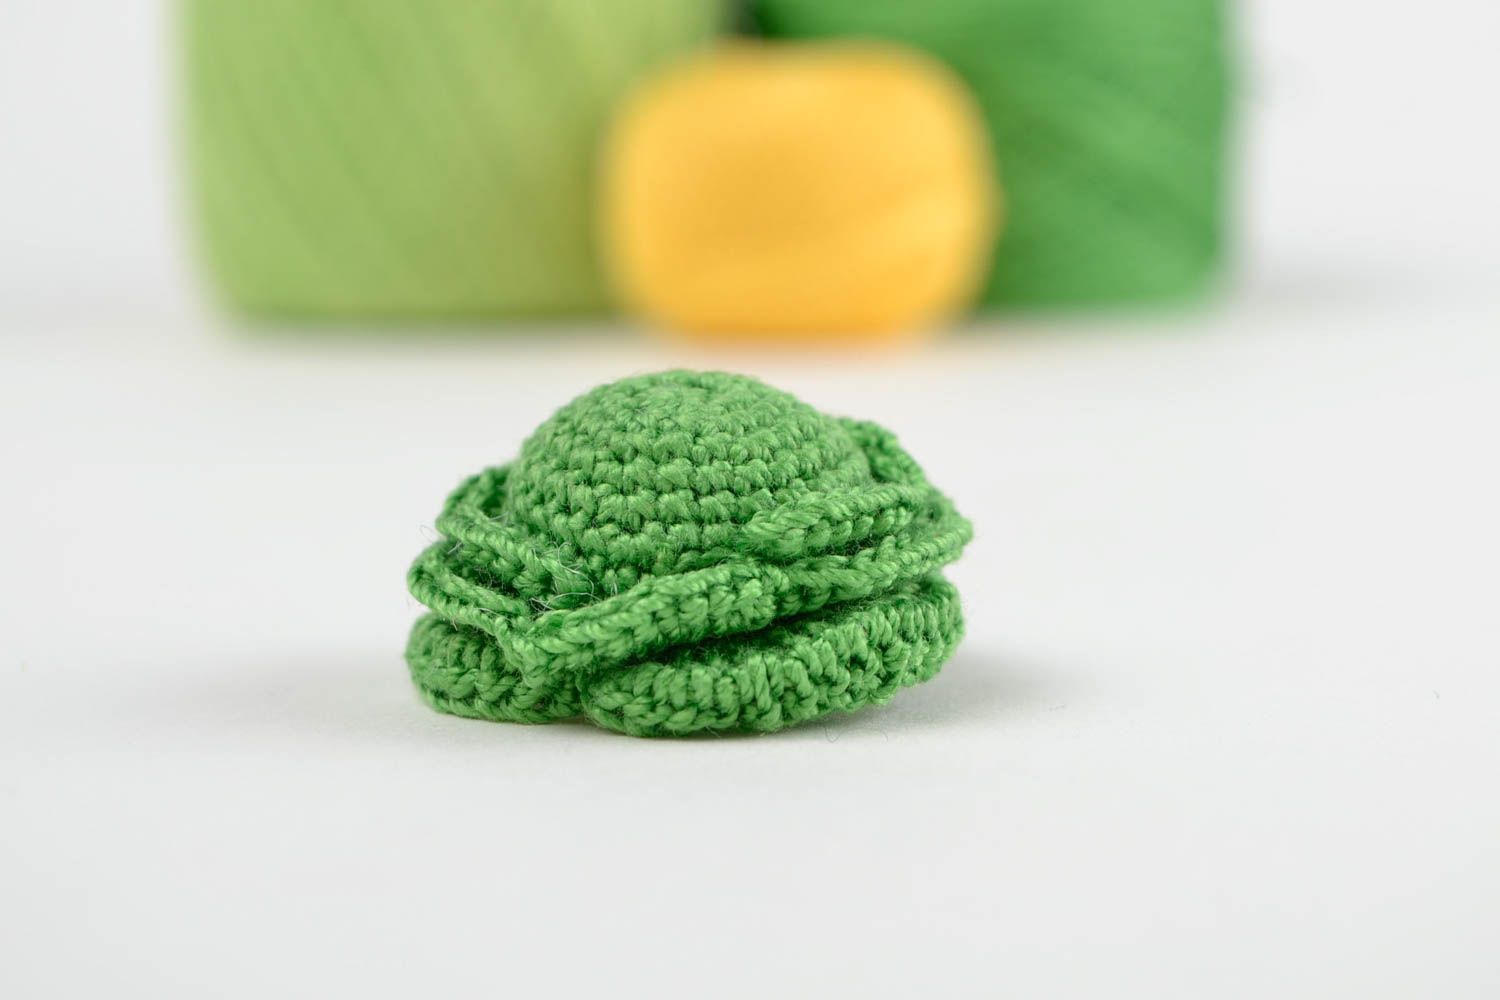 Handmade toy designer toy unusual toy for baby crocheted toy gift ideas photo 1